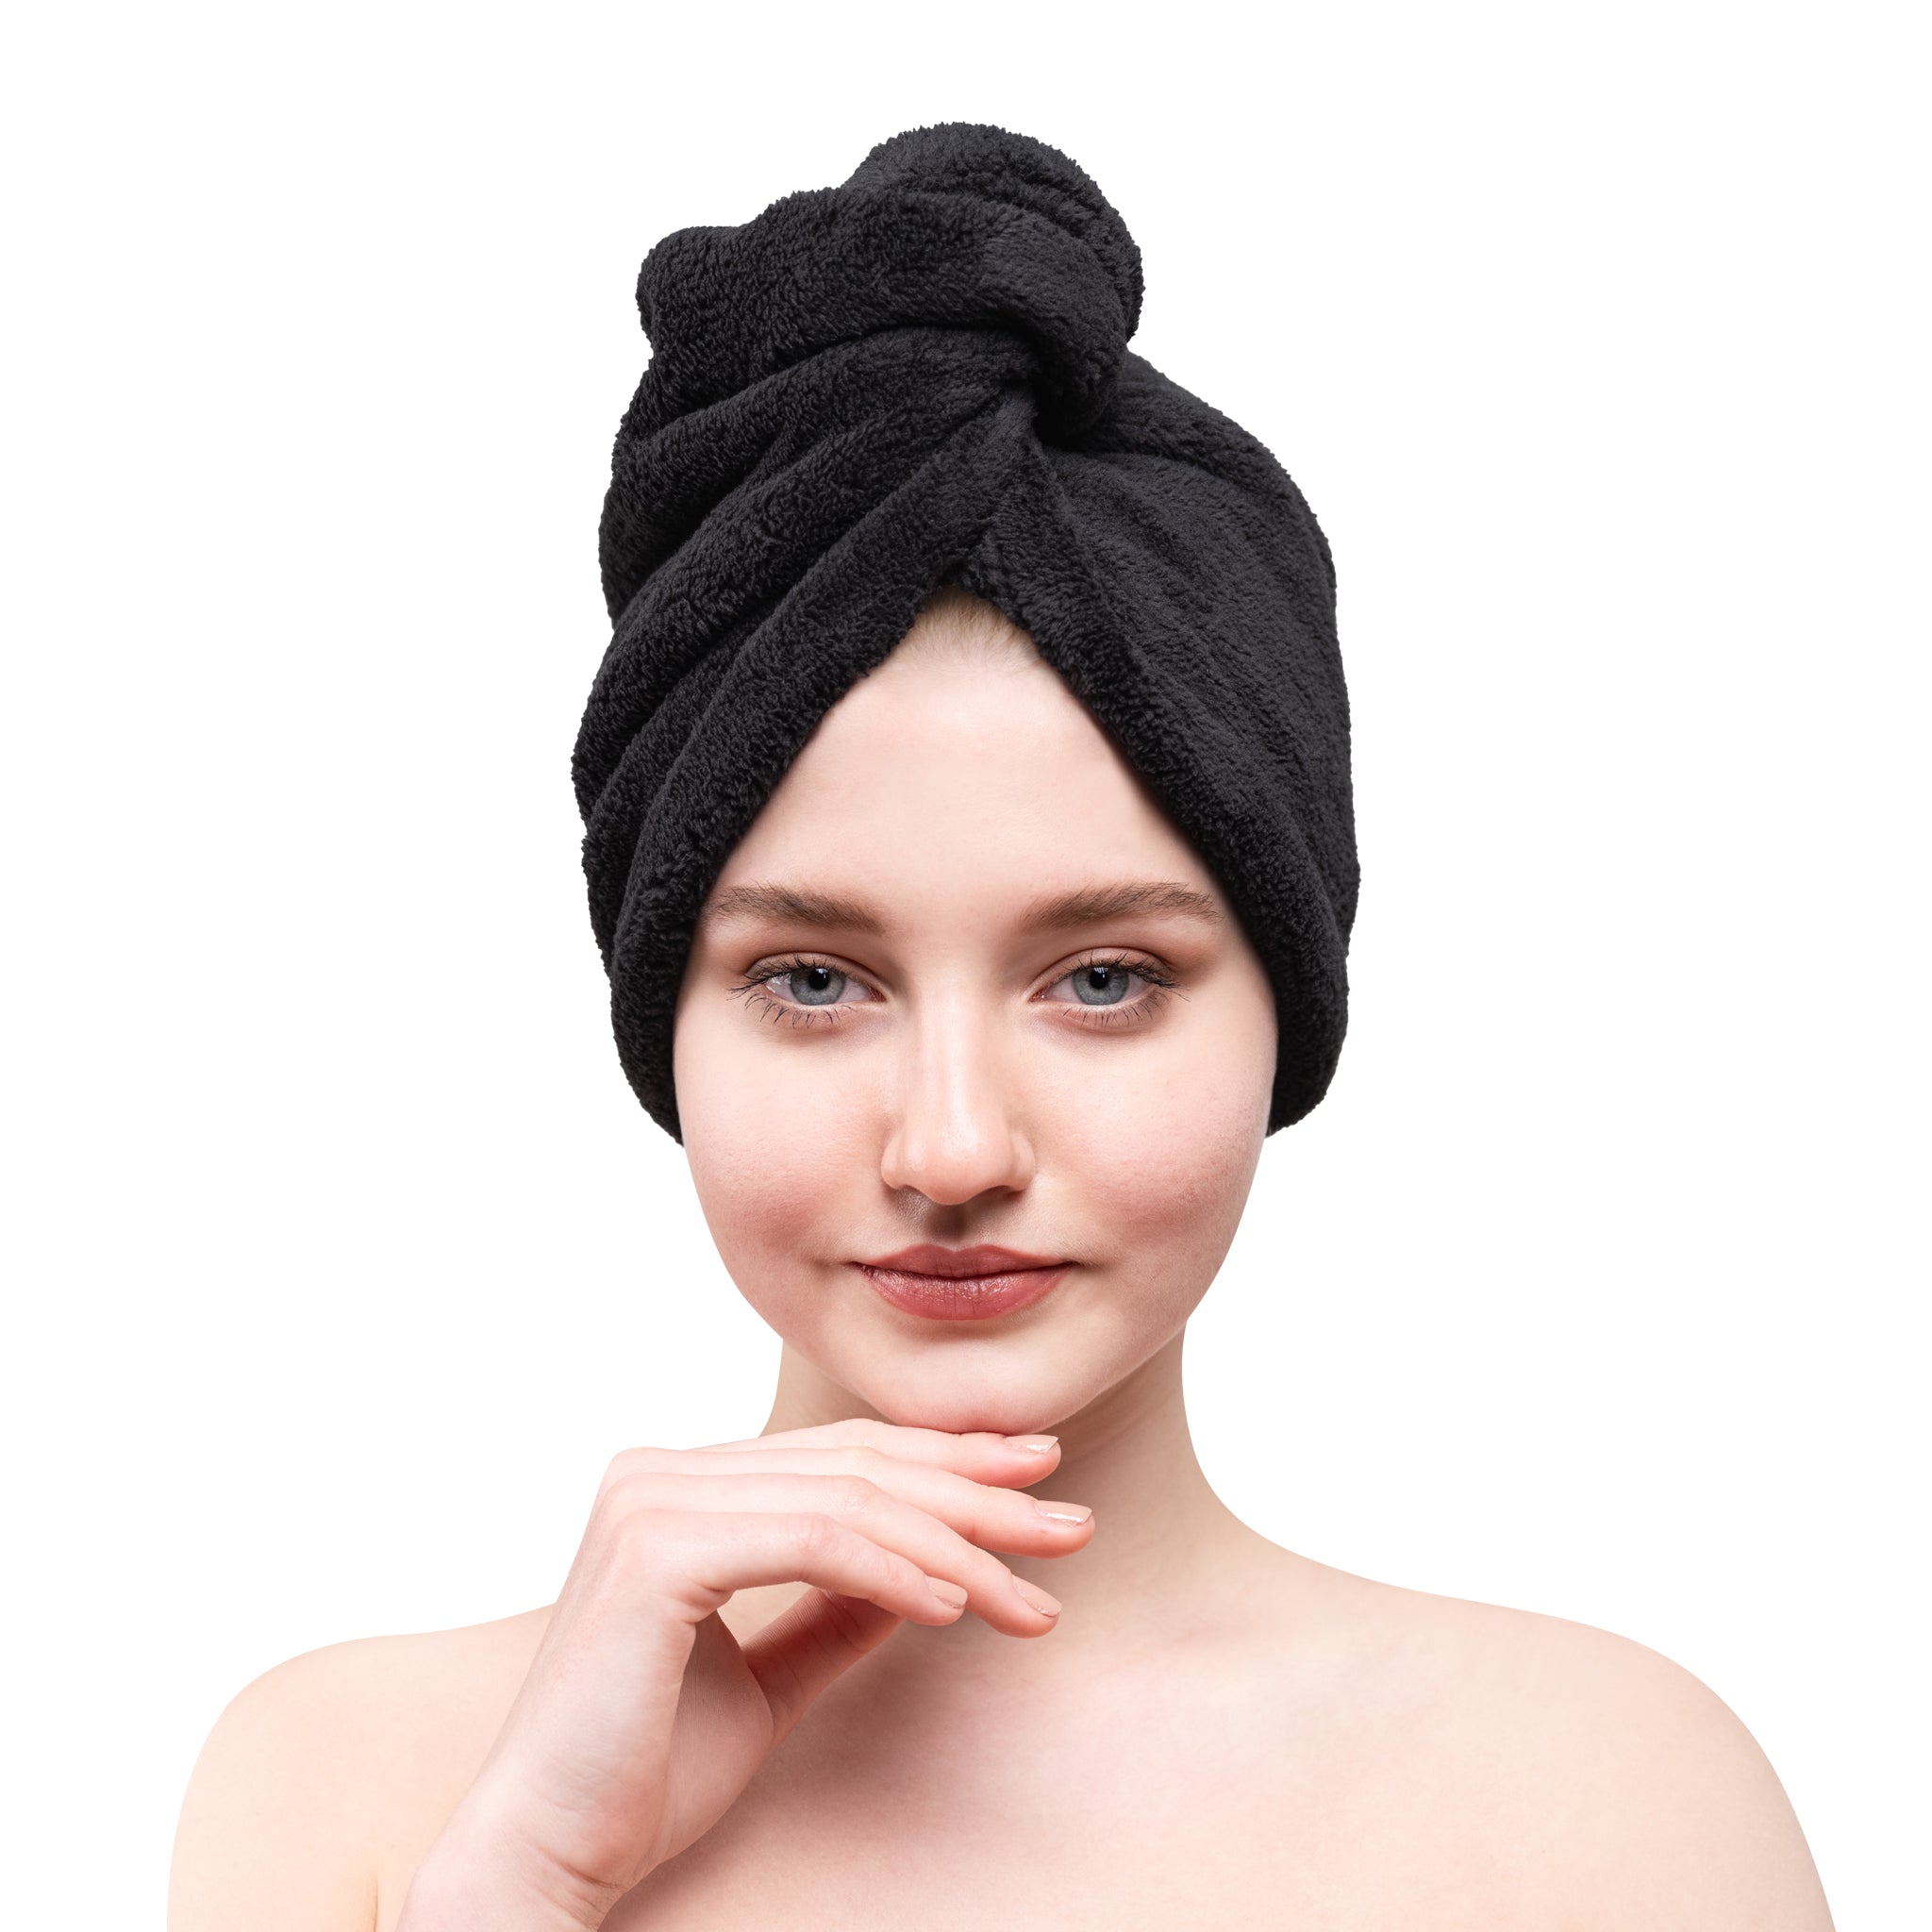 American Soft Linen Extremely Soft Super Absorbent and Fast Drying Hair Towel -2-packed-black-1